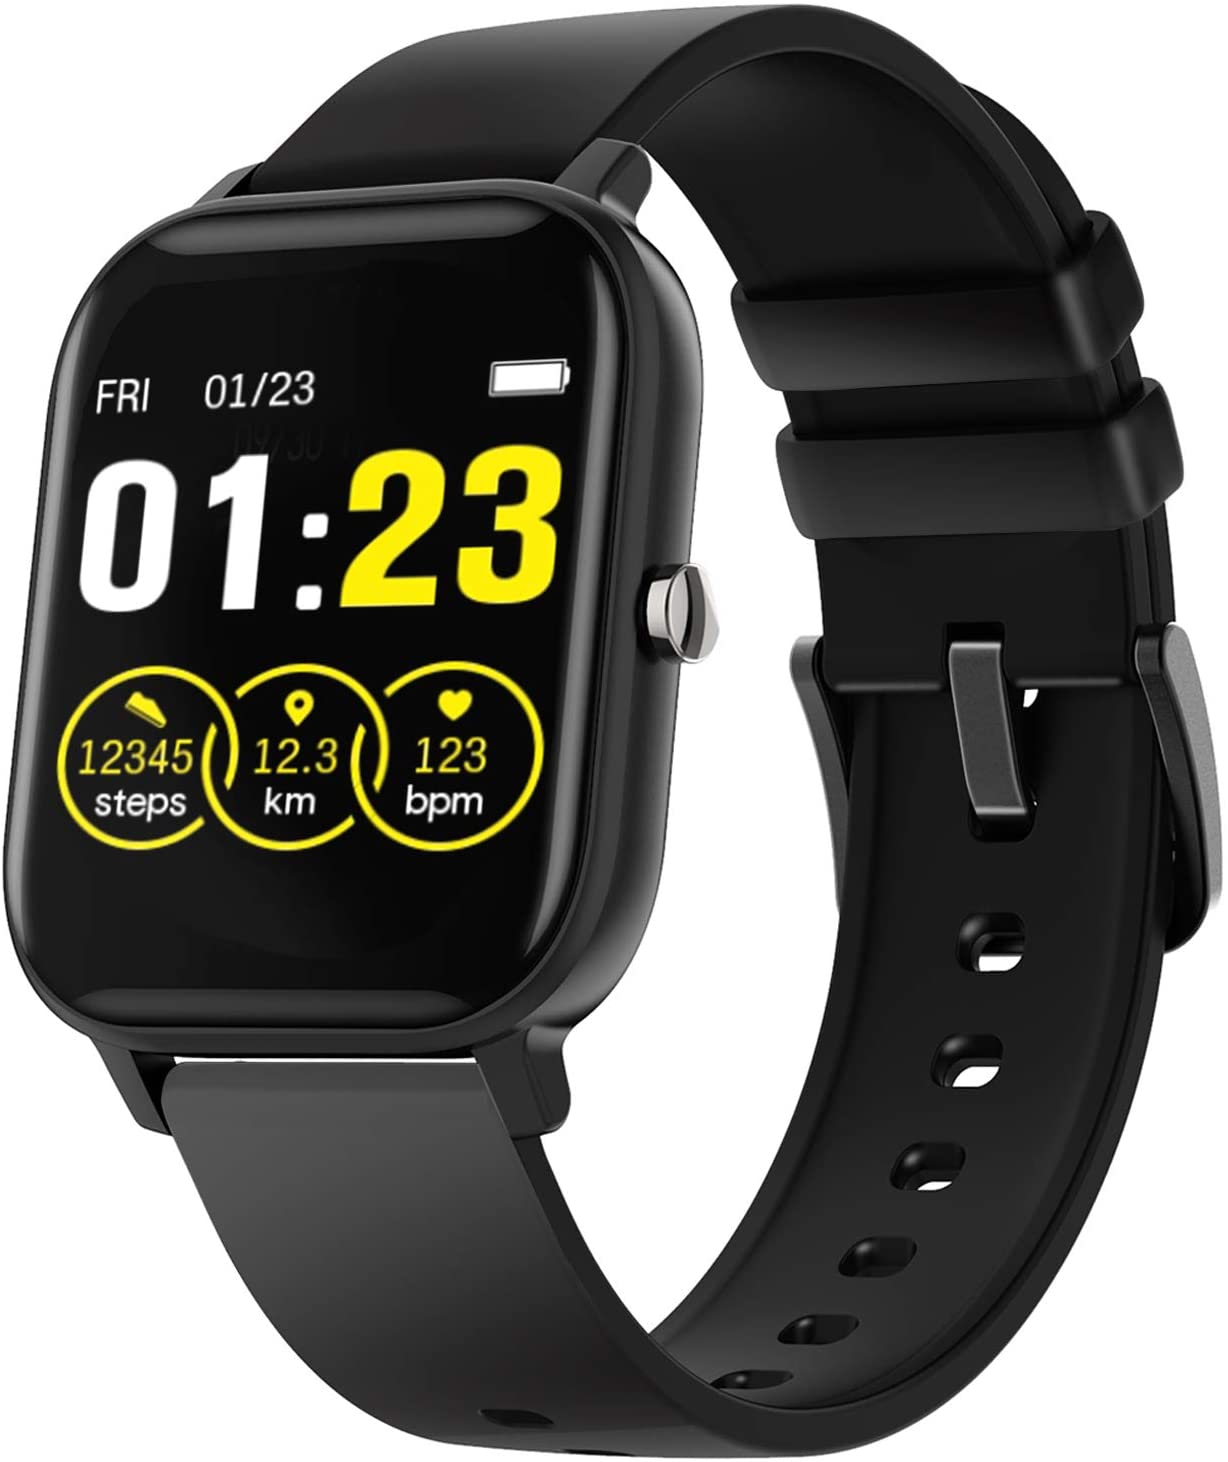 Android Smart Watch Iphone Compatible Smartwatch For Women Men Fitness Tracker With Heart Rate